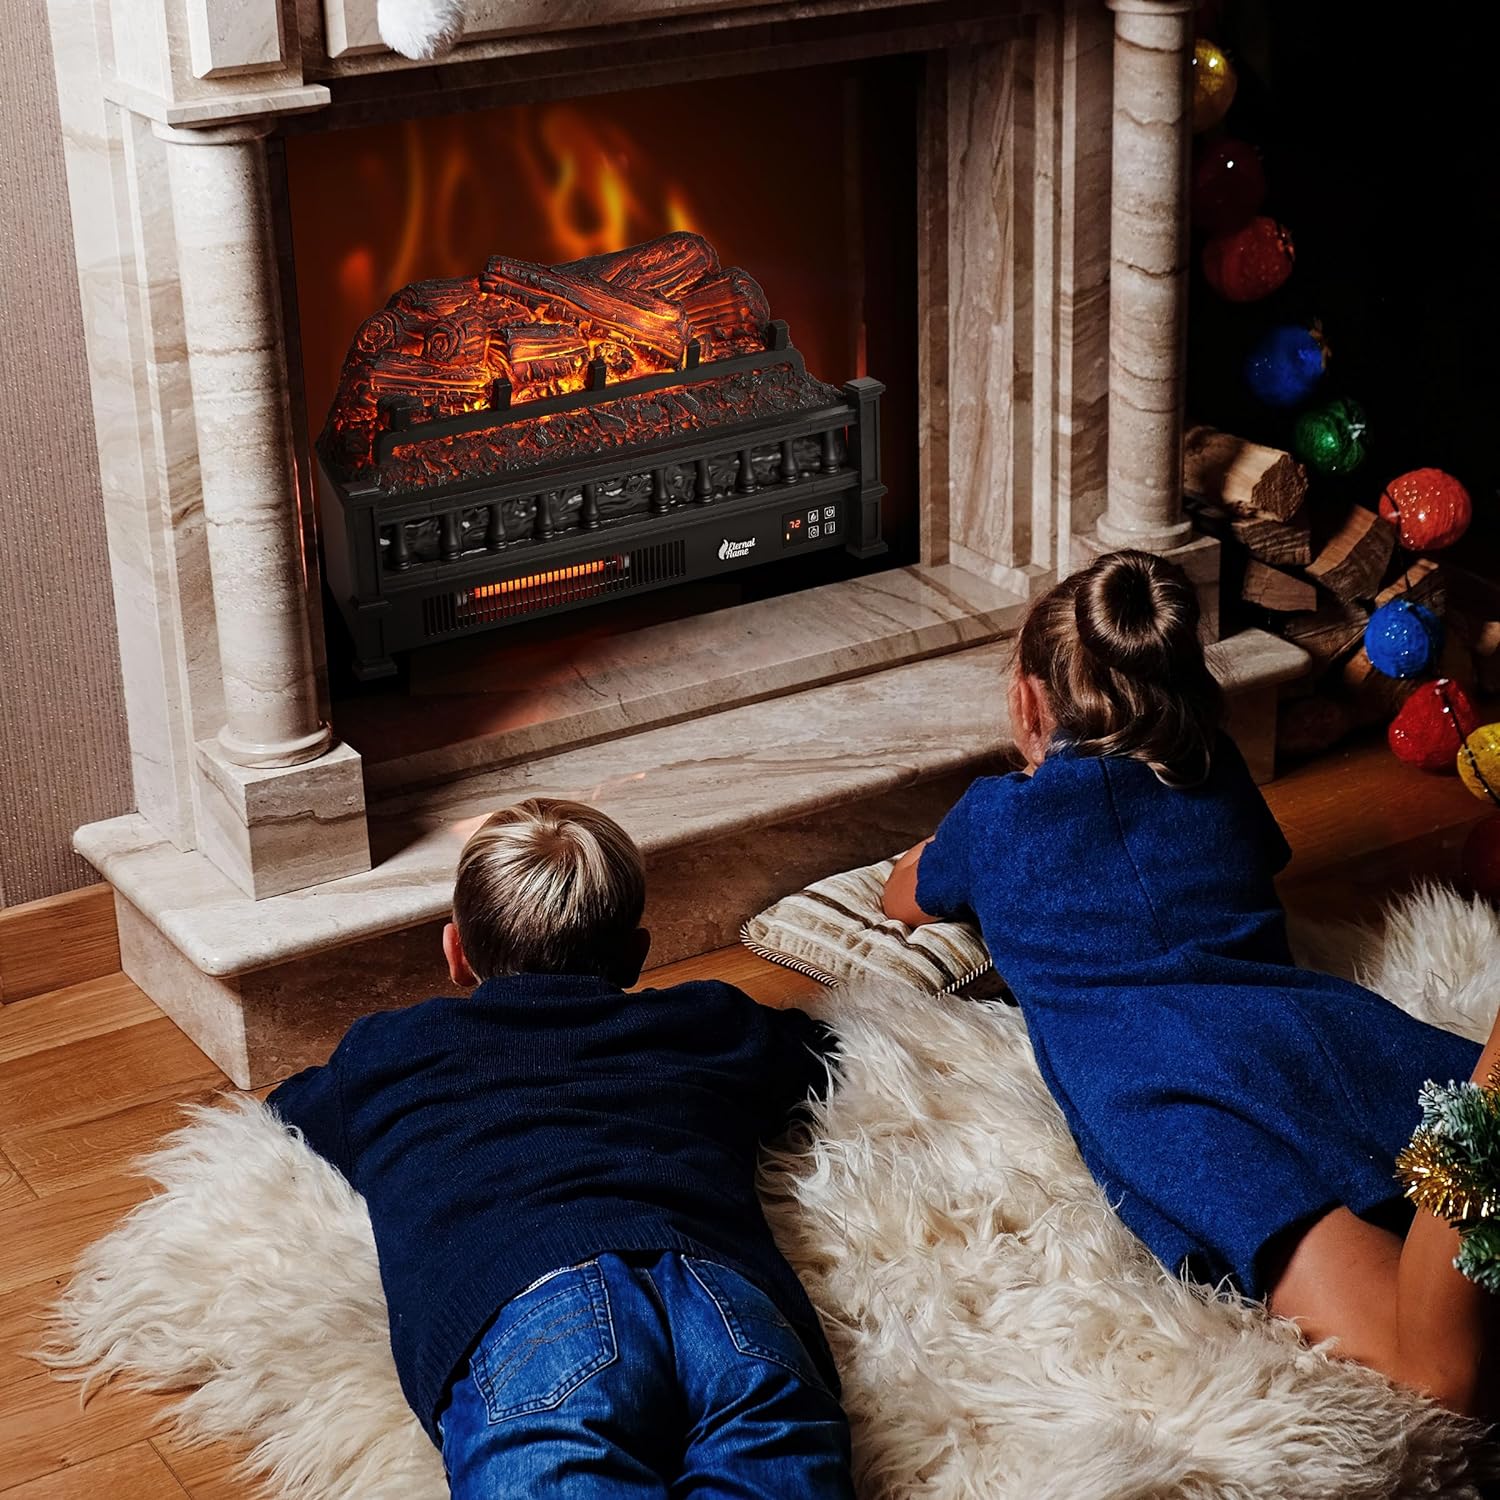 TURBRO 23" Eternal Flame Infrared Quartz Electric Fireplace Logs, Realistic Pinewood Ember Bed, Thermostat, 1500W Black